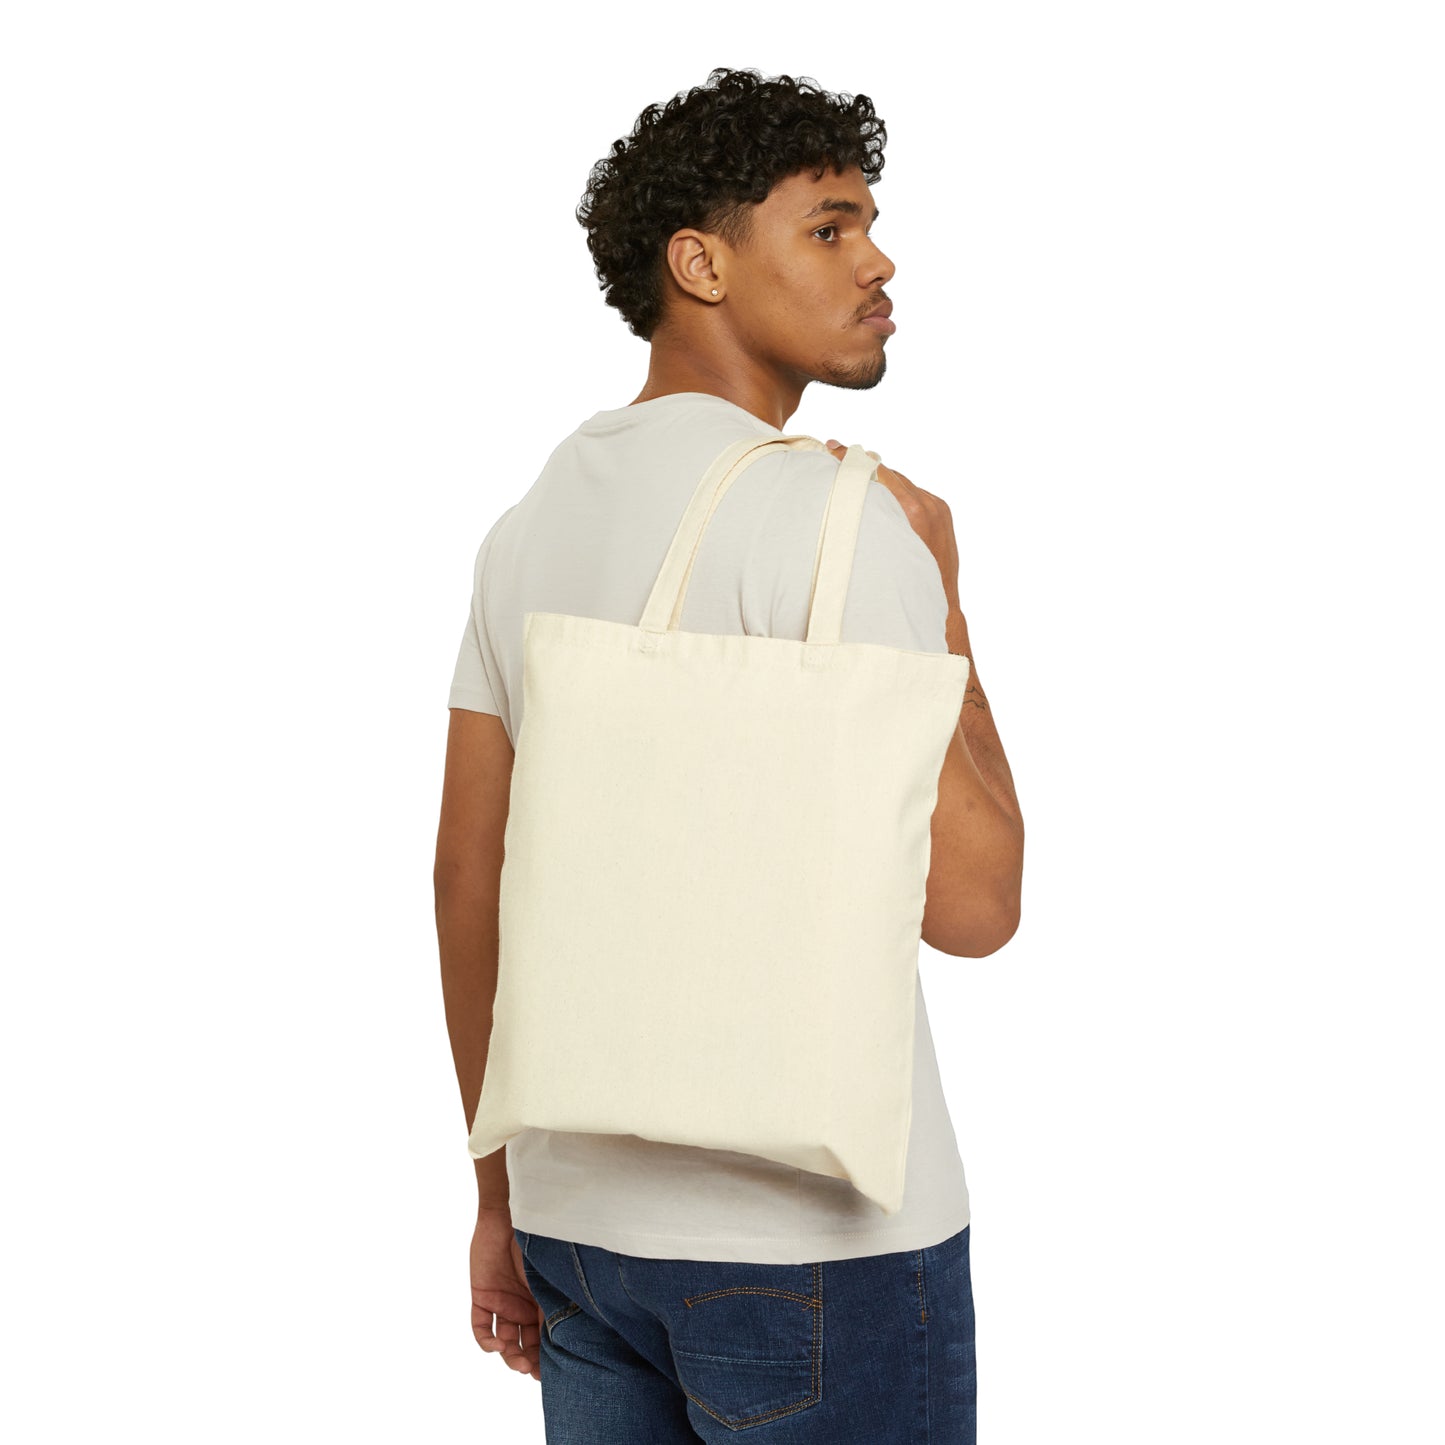 Welcome 1 - Cotton Canvas Tote Bag